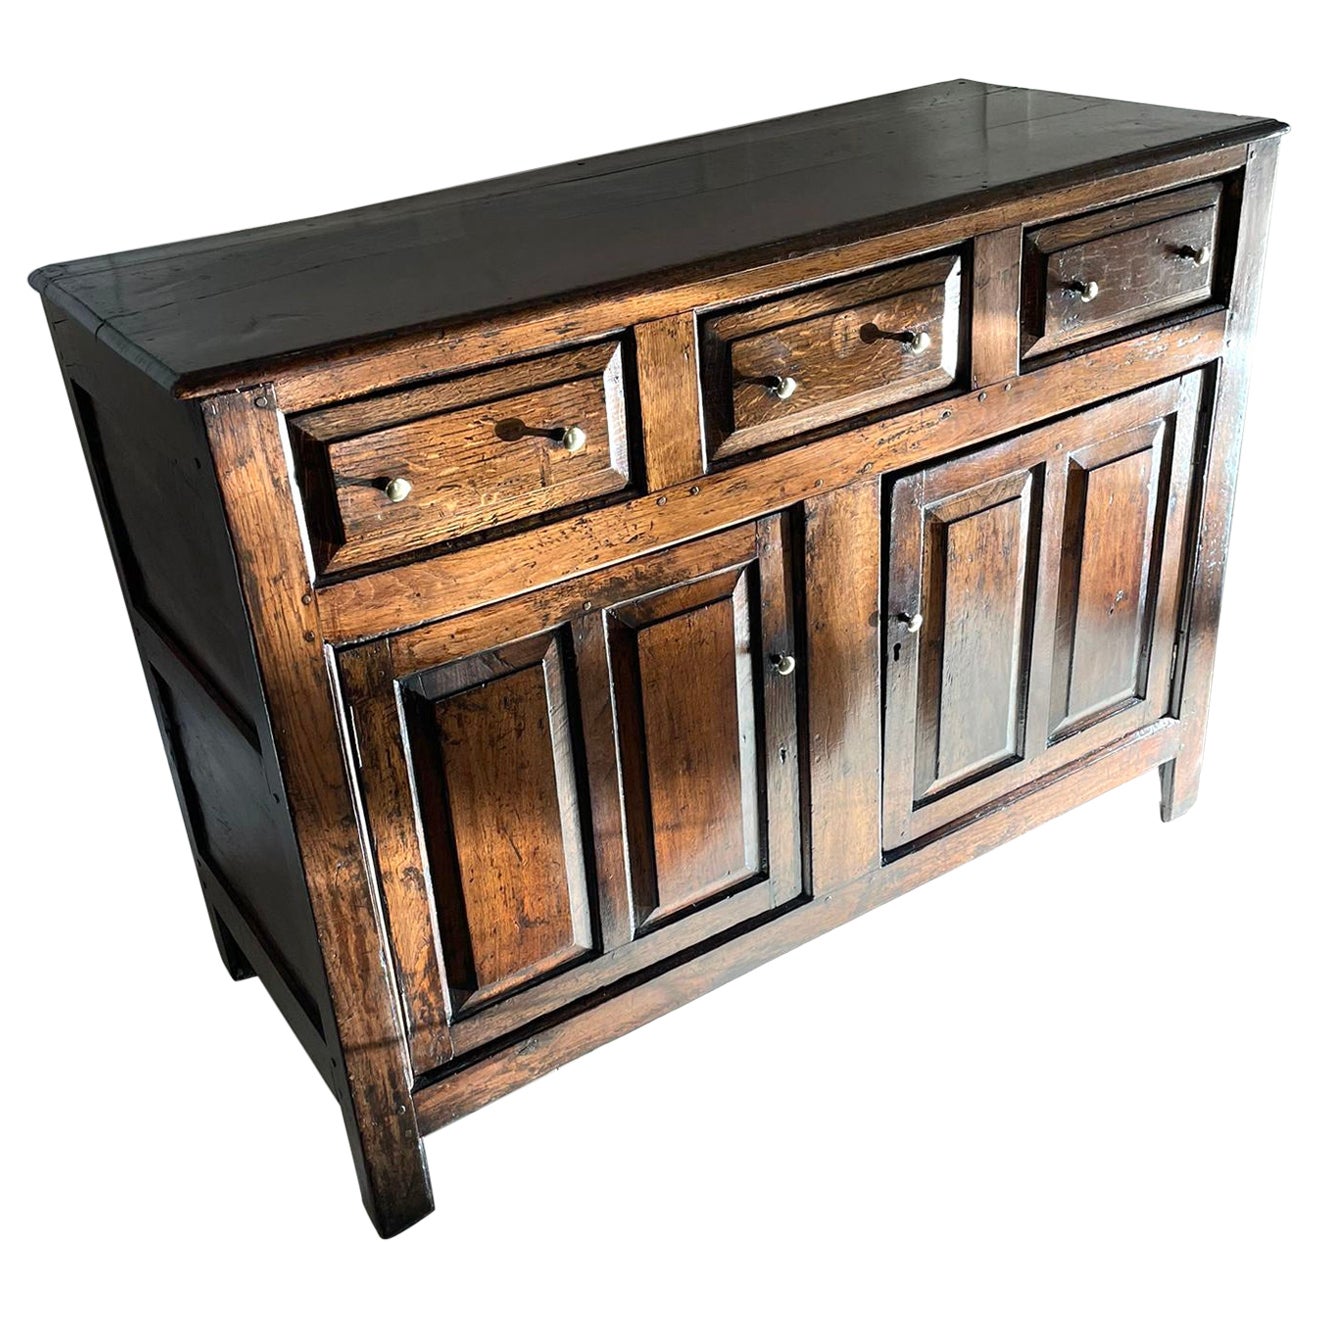 What’s the difference between a bureau and a dresser?